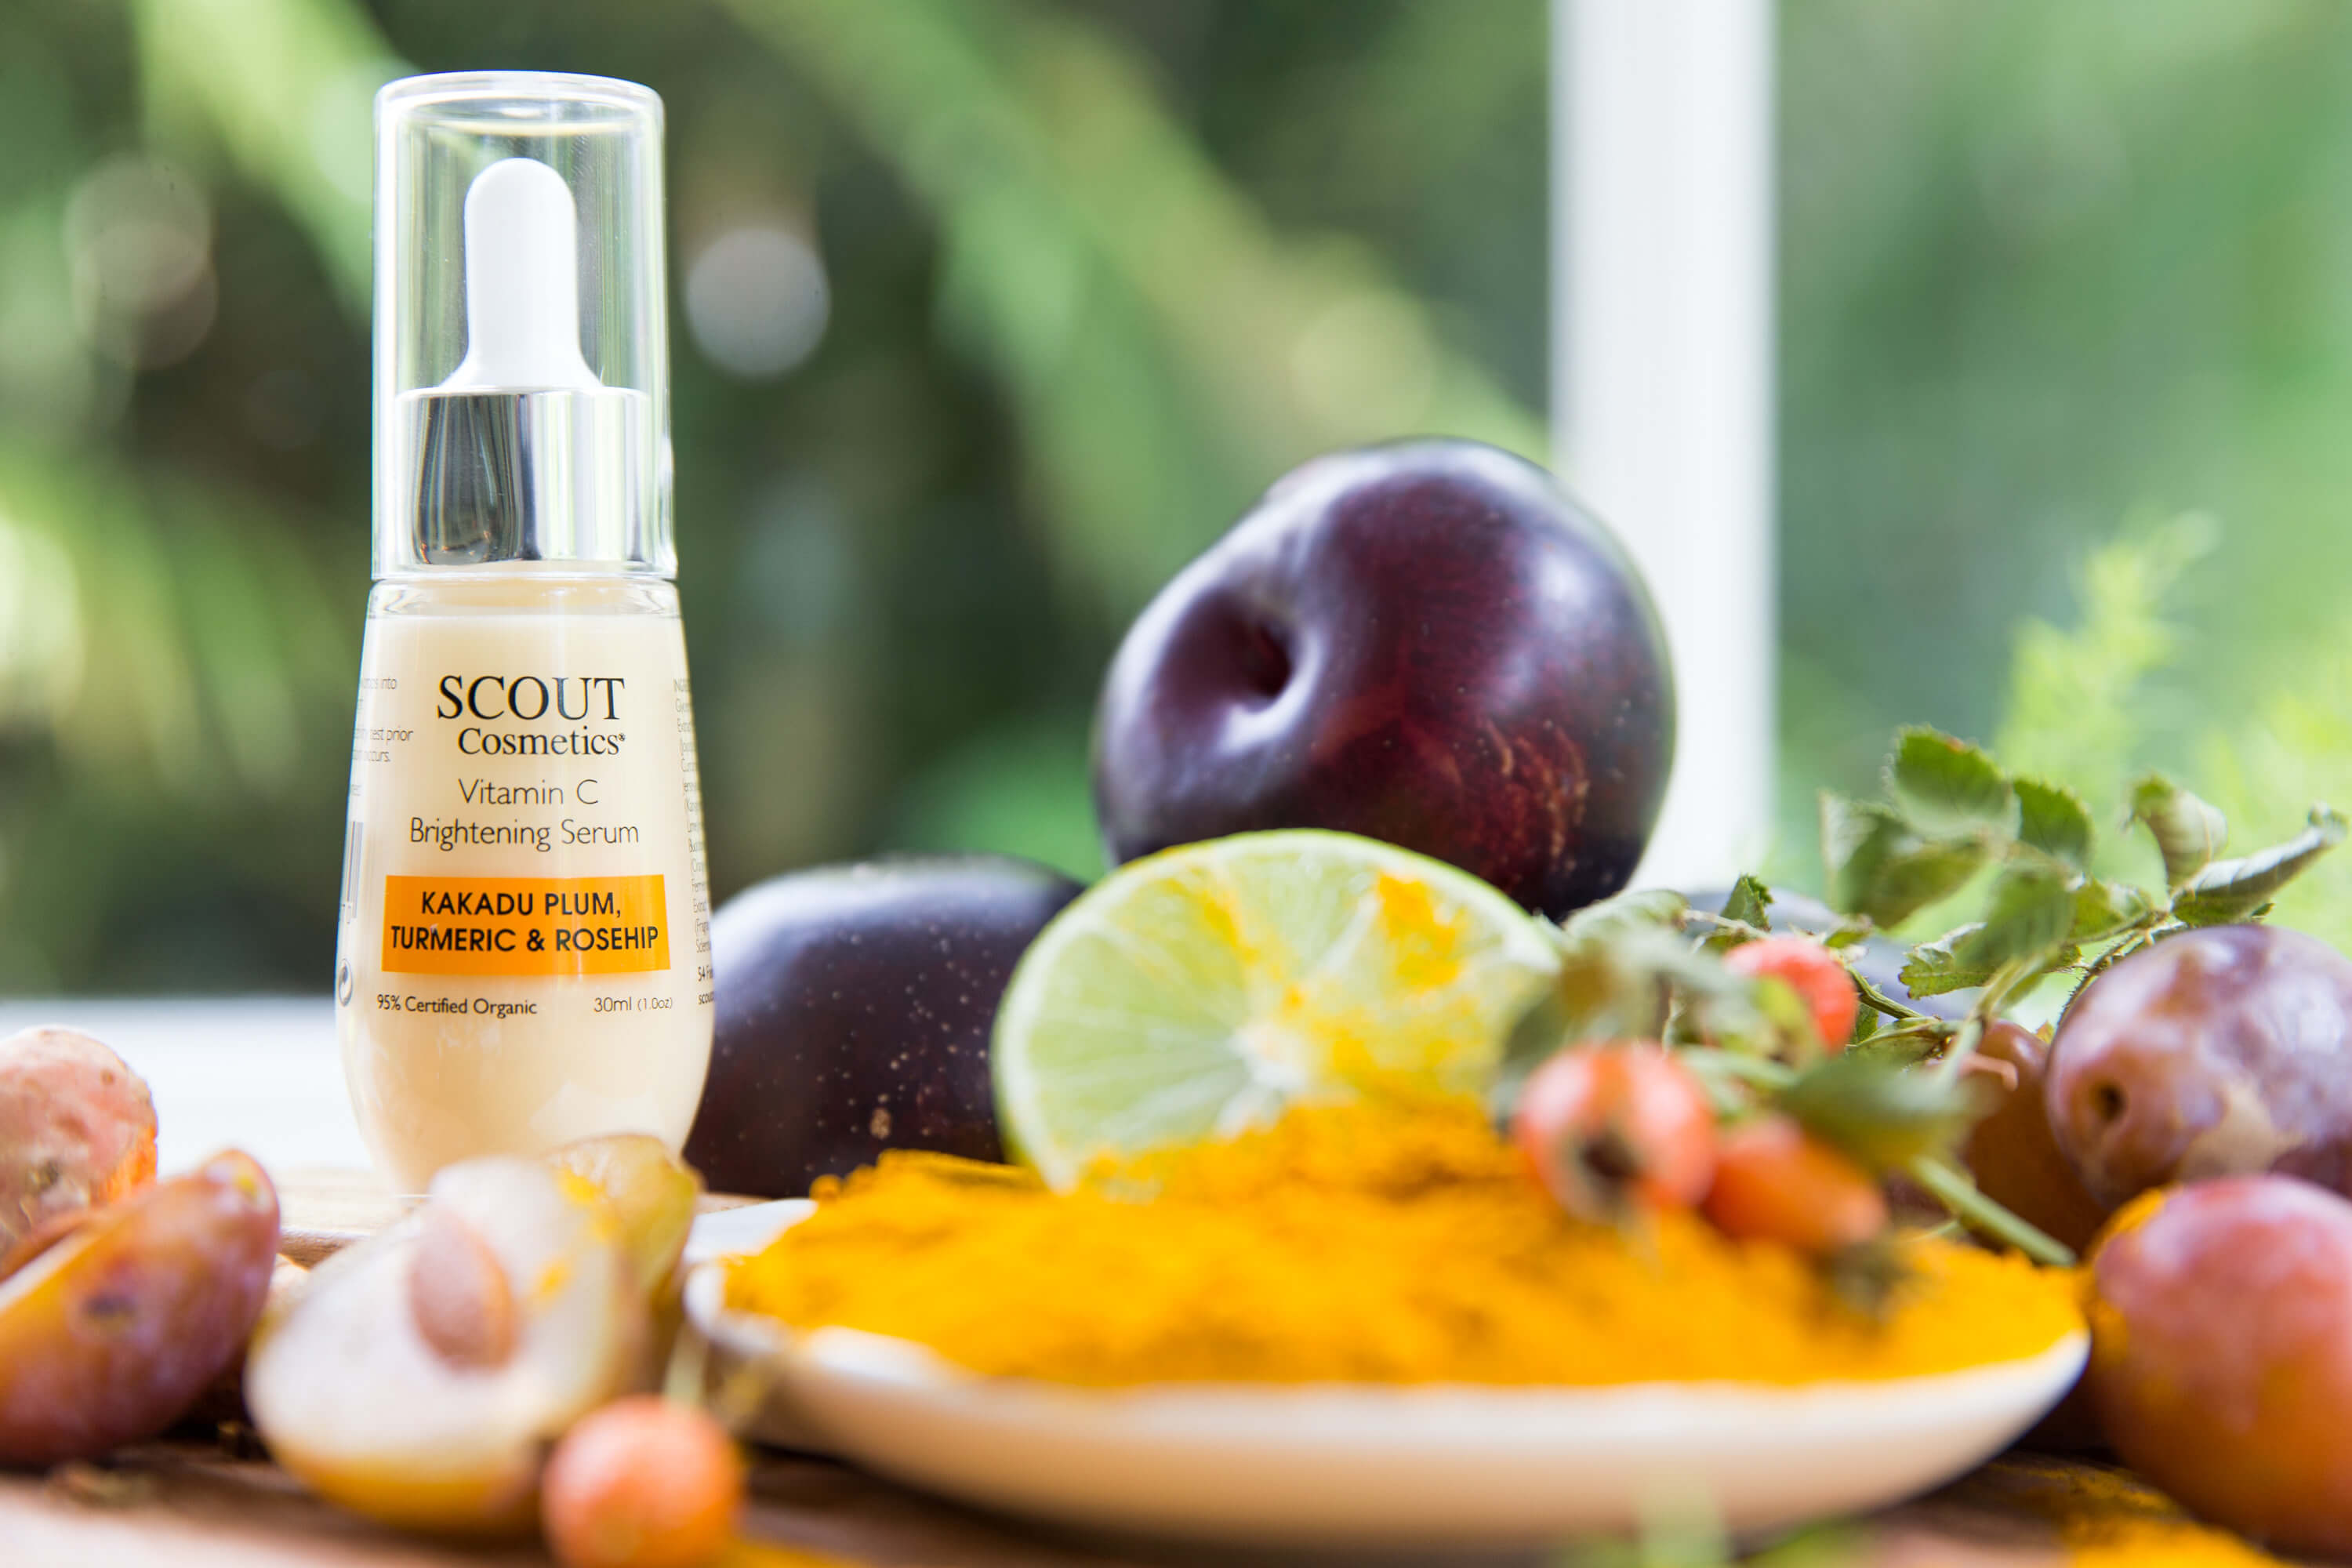 SCOUT Organic Active Beauty - Restore Your Skin's Glow with Vitamin C Skincare